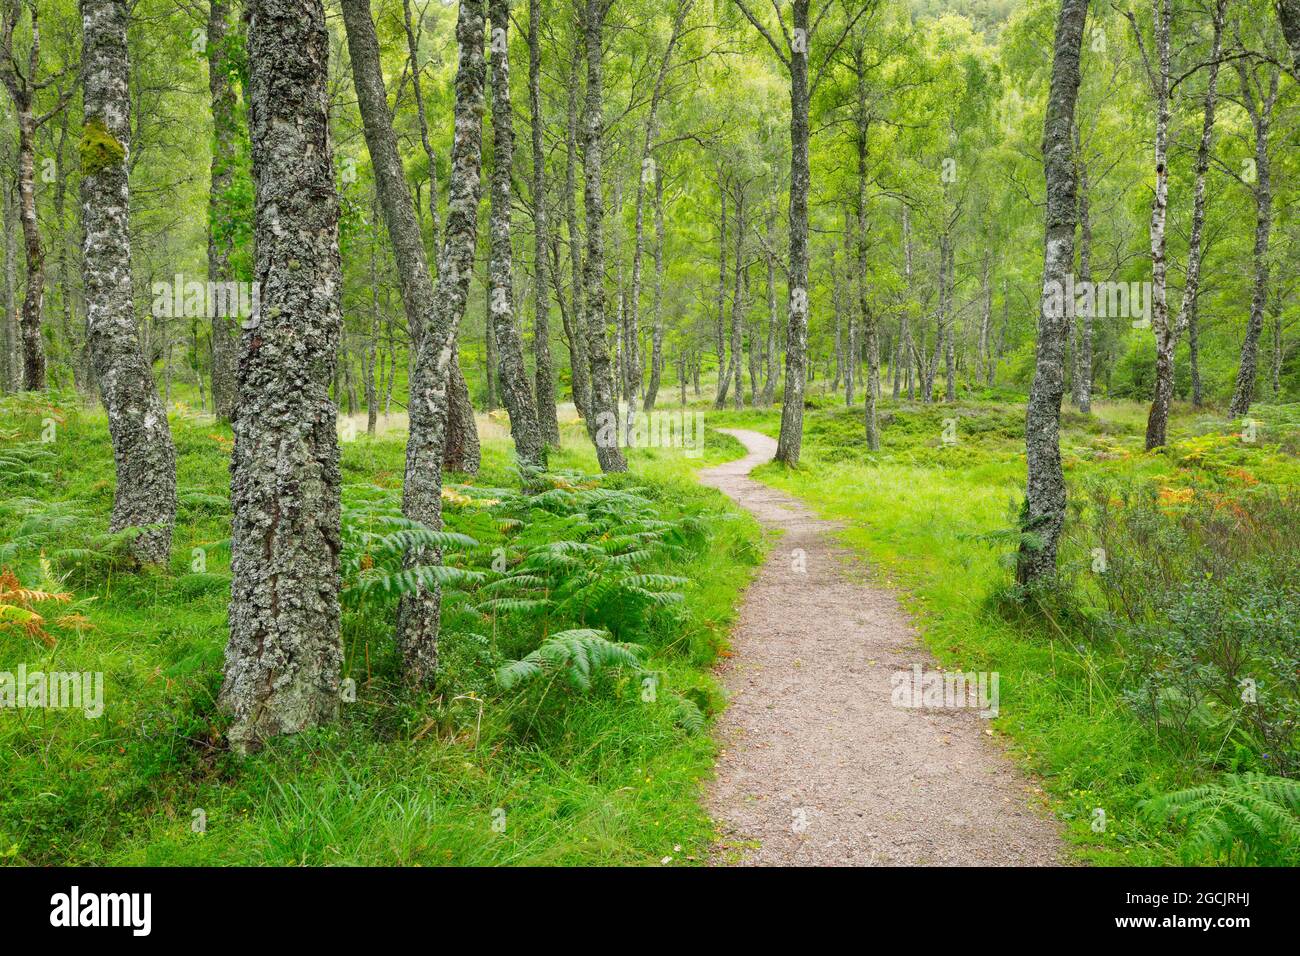 geography / travel, Great Britain, Scotland, footway in the birch forest, NO-EXCLUSIVE-USE FOR FOLDING-CARD-GREETING-CARD-POSTCARD-USE Stock Photo